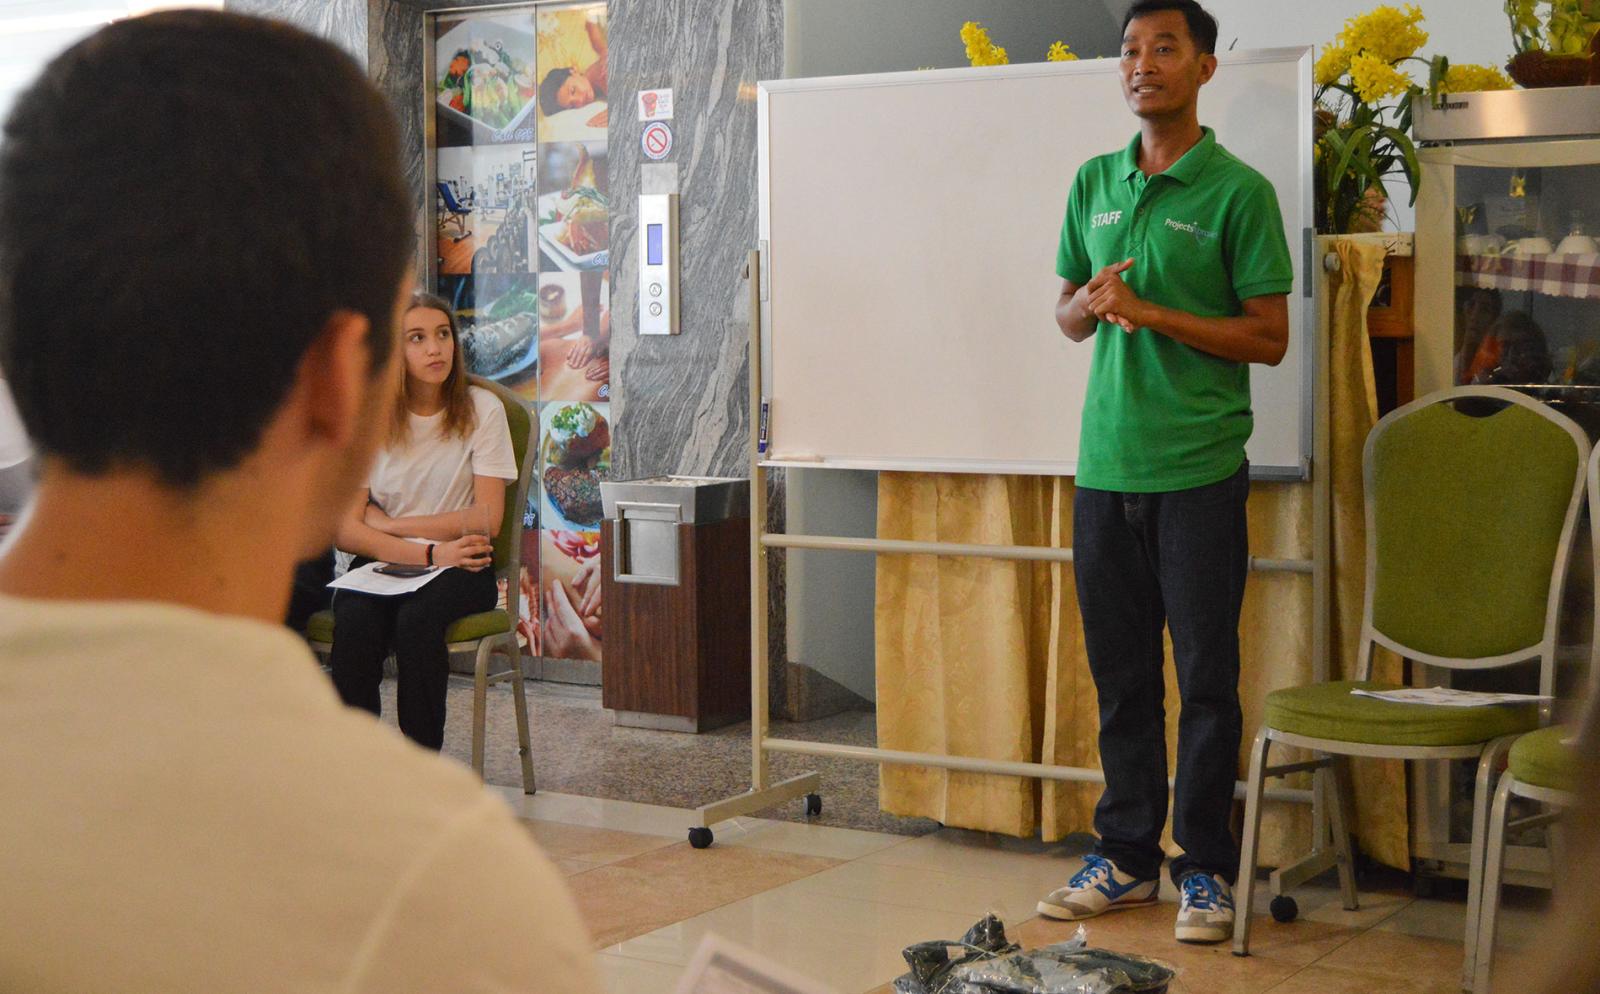 Projects Abroad Volunteers being introduced to local culture and language after their arrival in Cambodia.